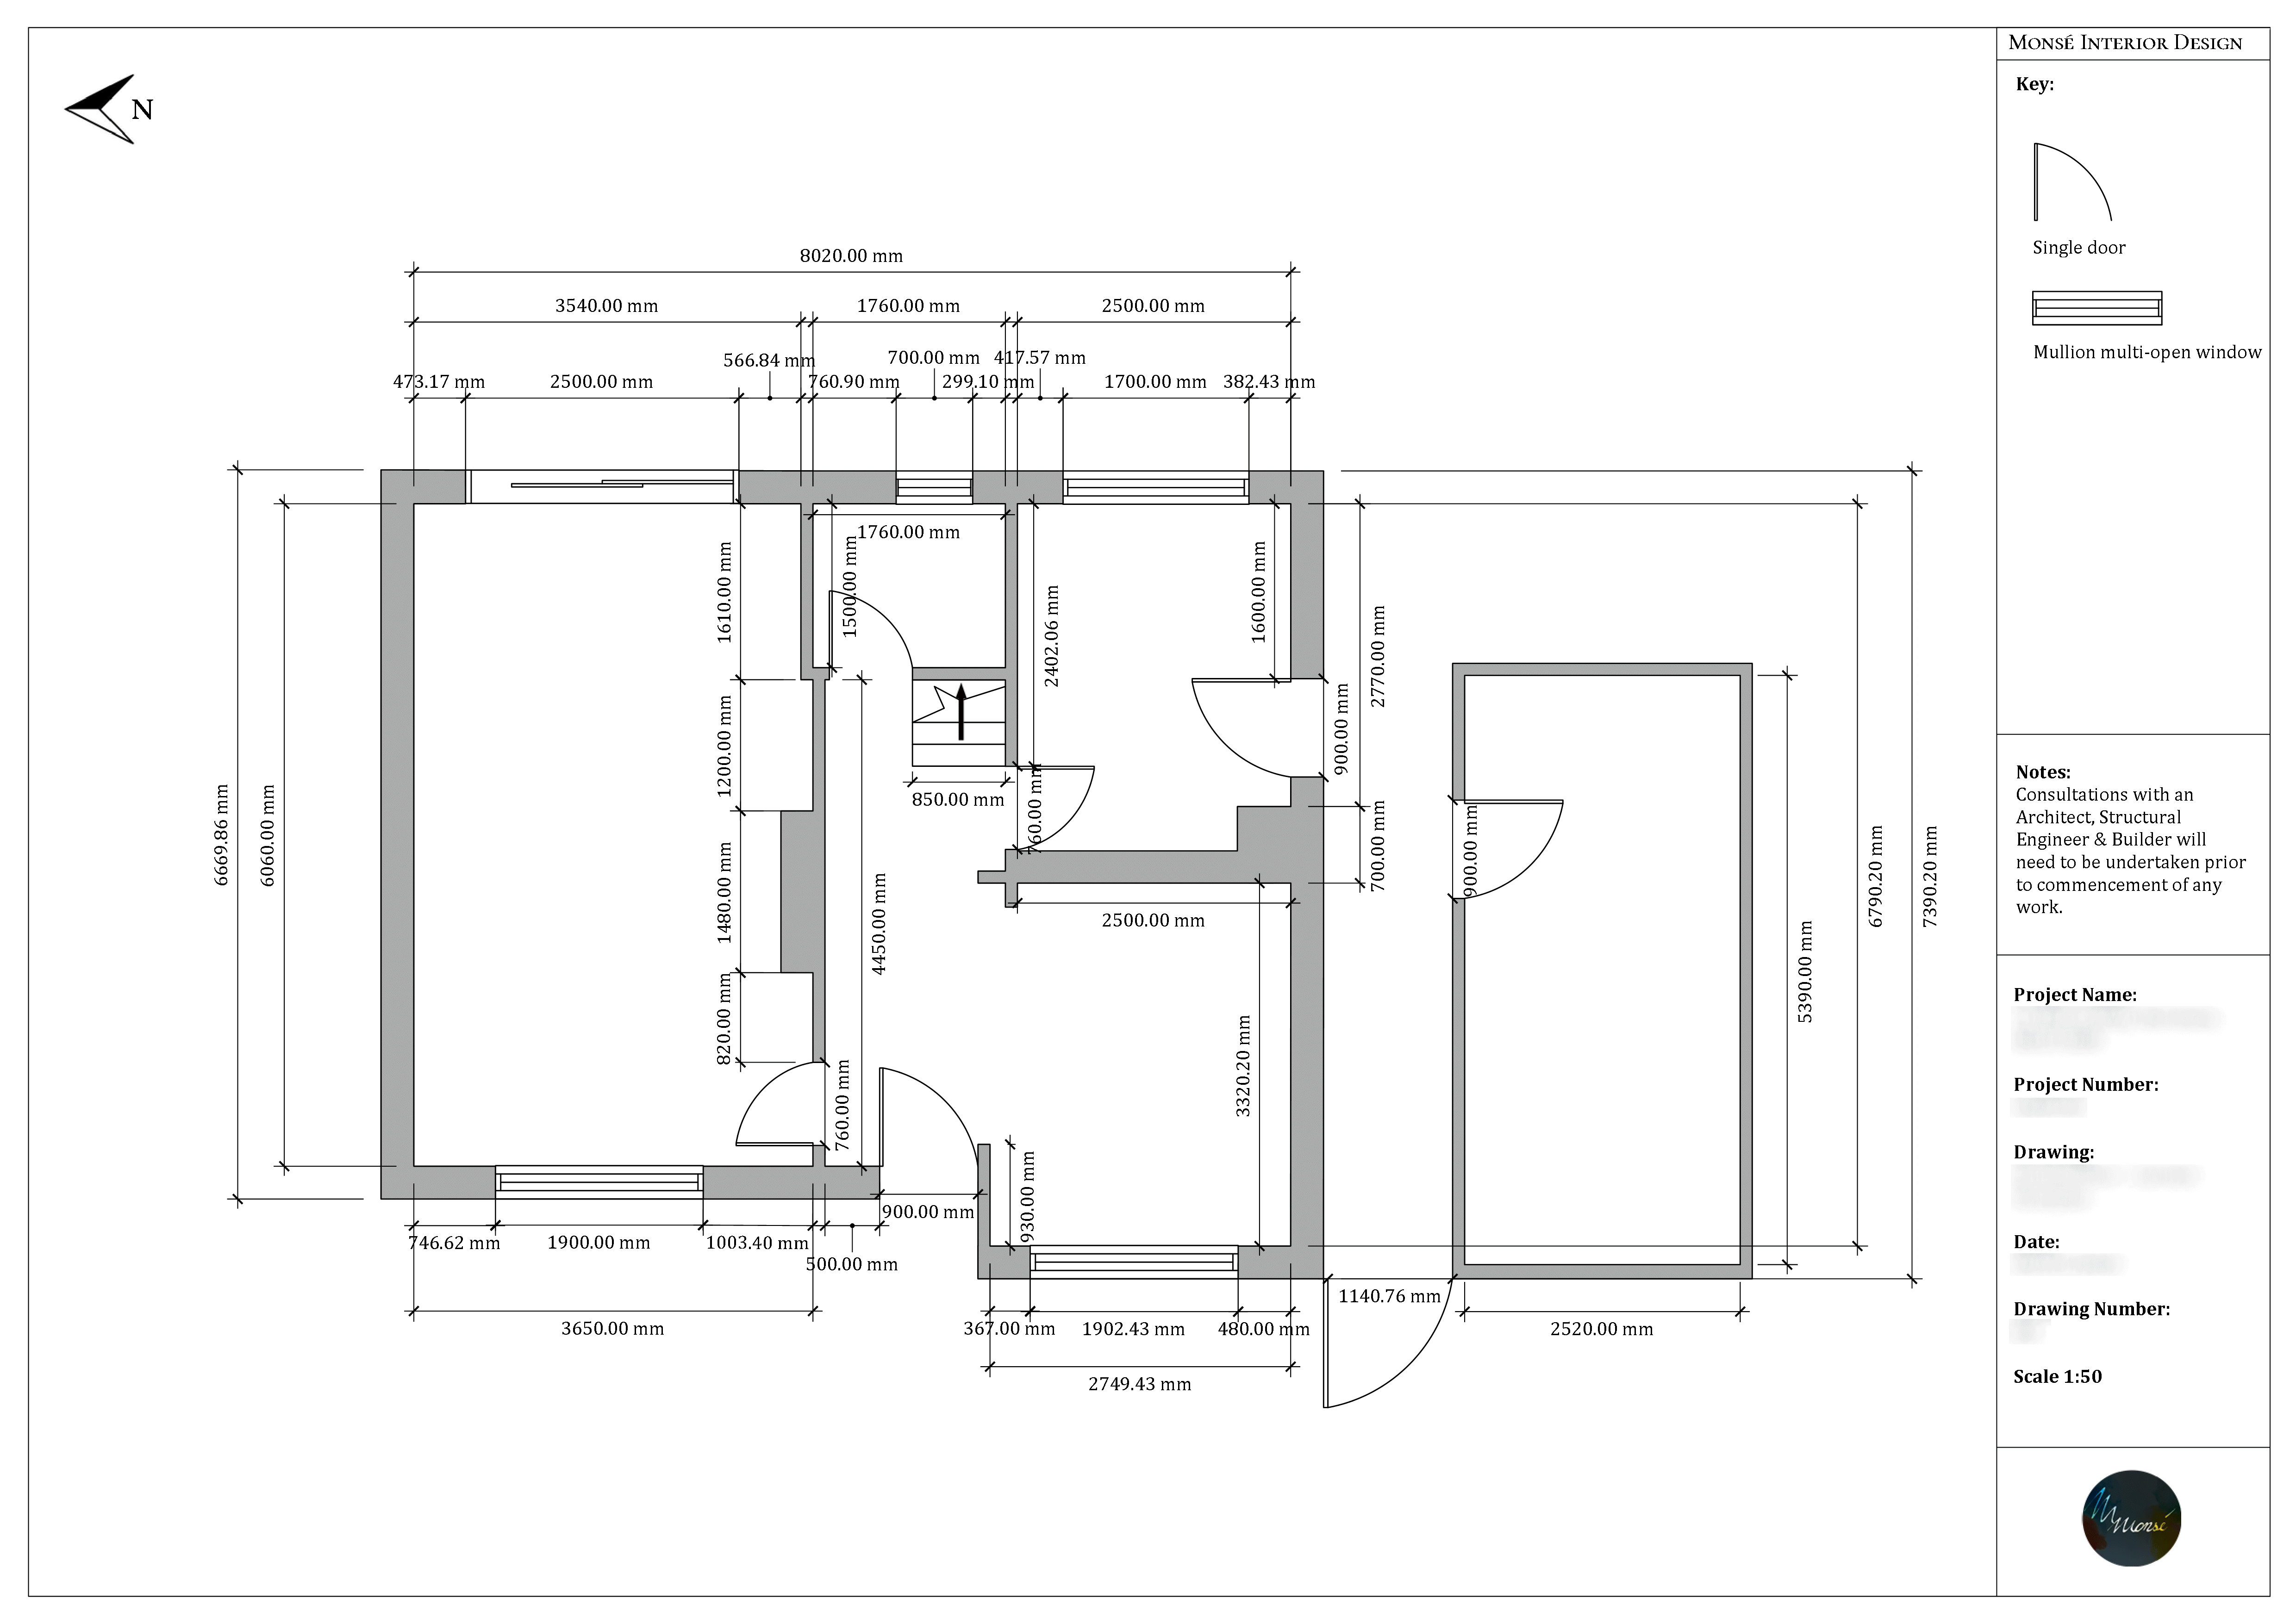 Sussex renovation & extension – ground floor current layout